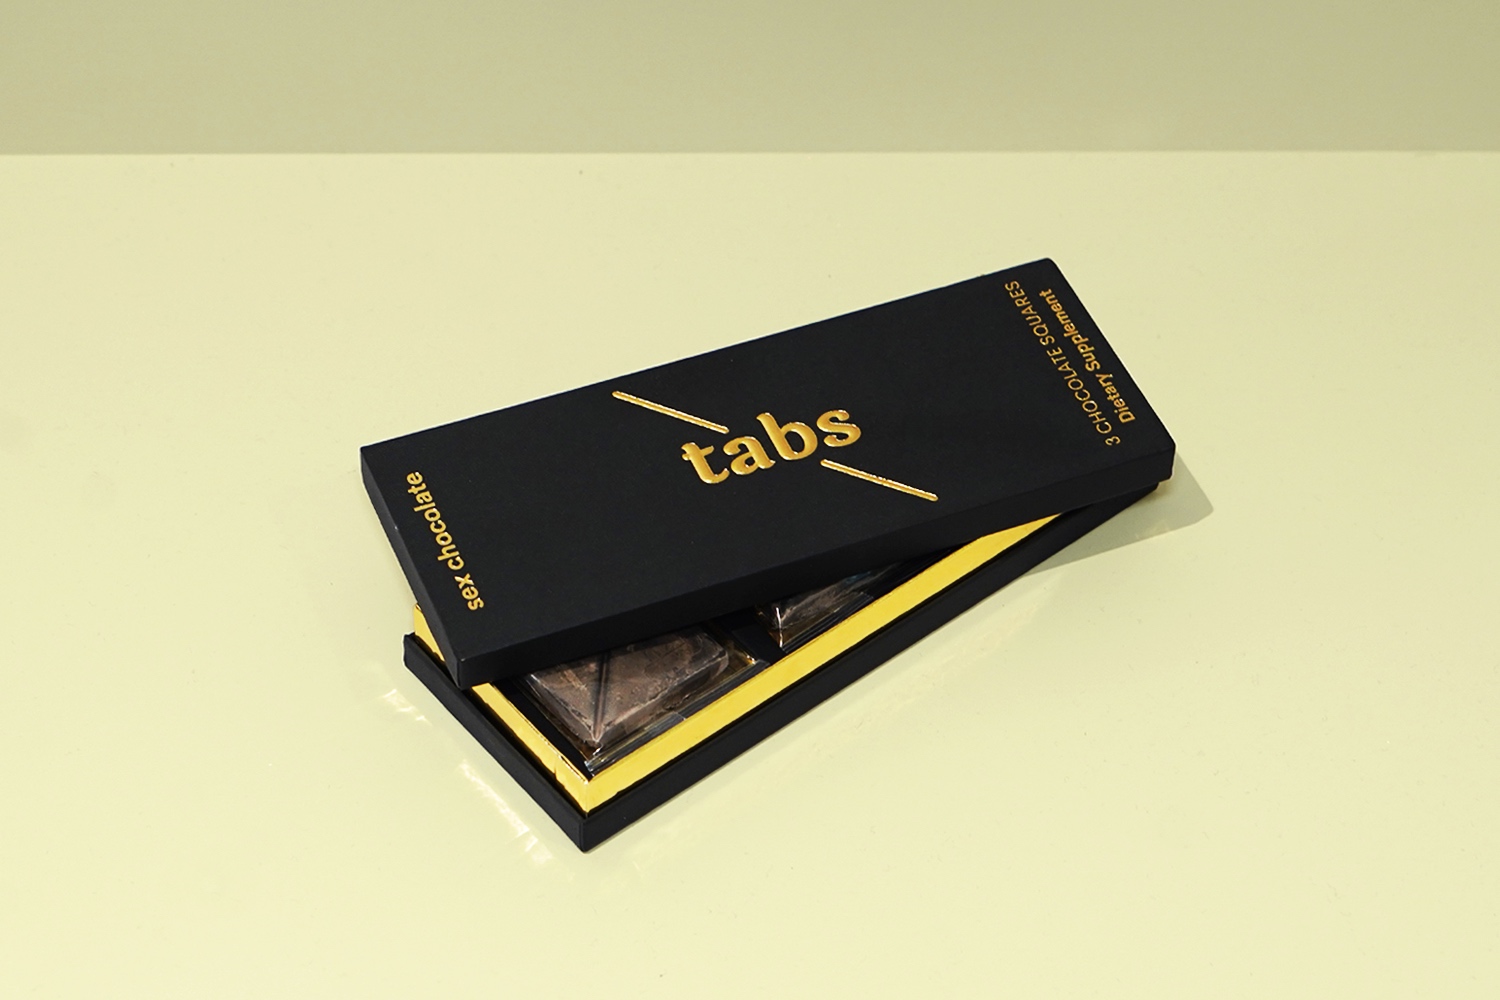 Tabs Chocolate Review - Real Tested